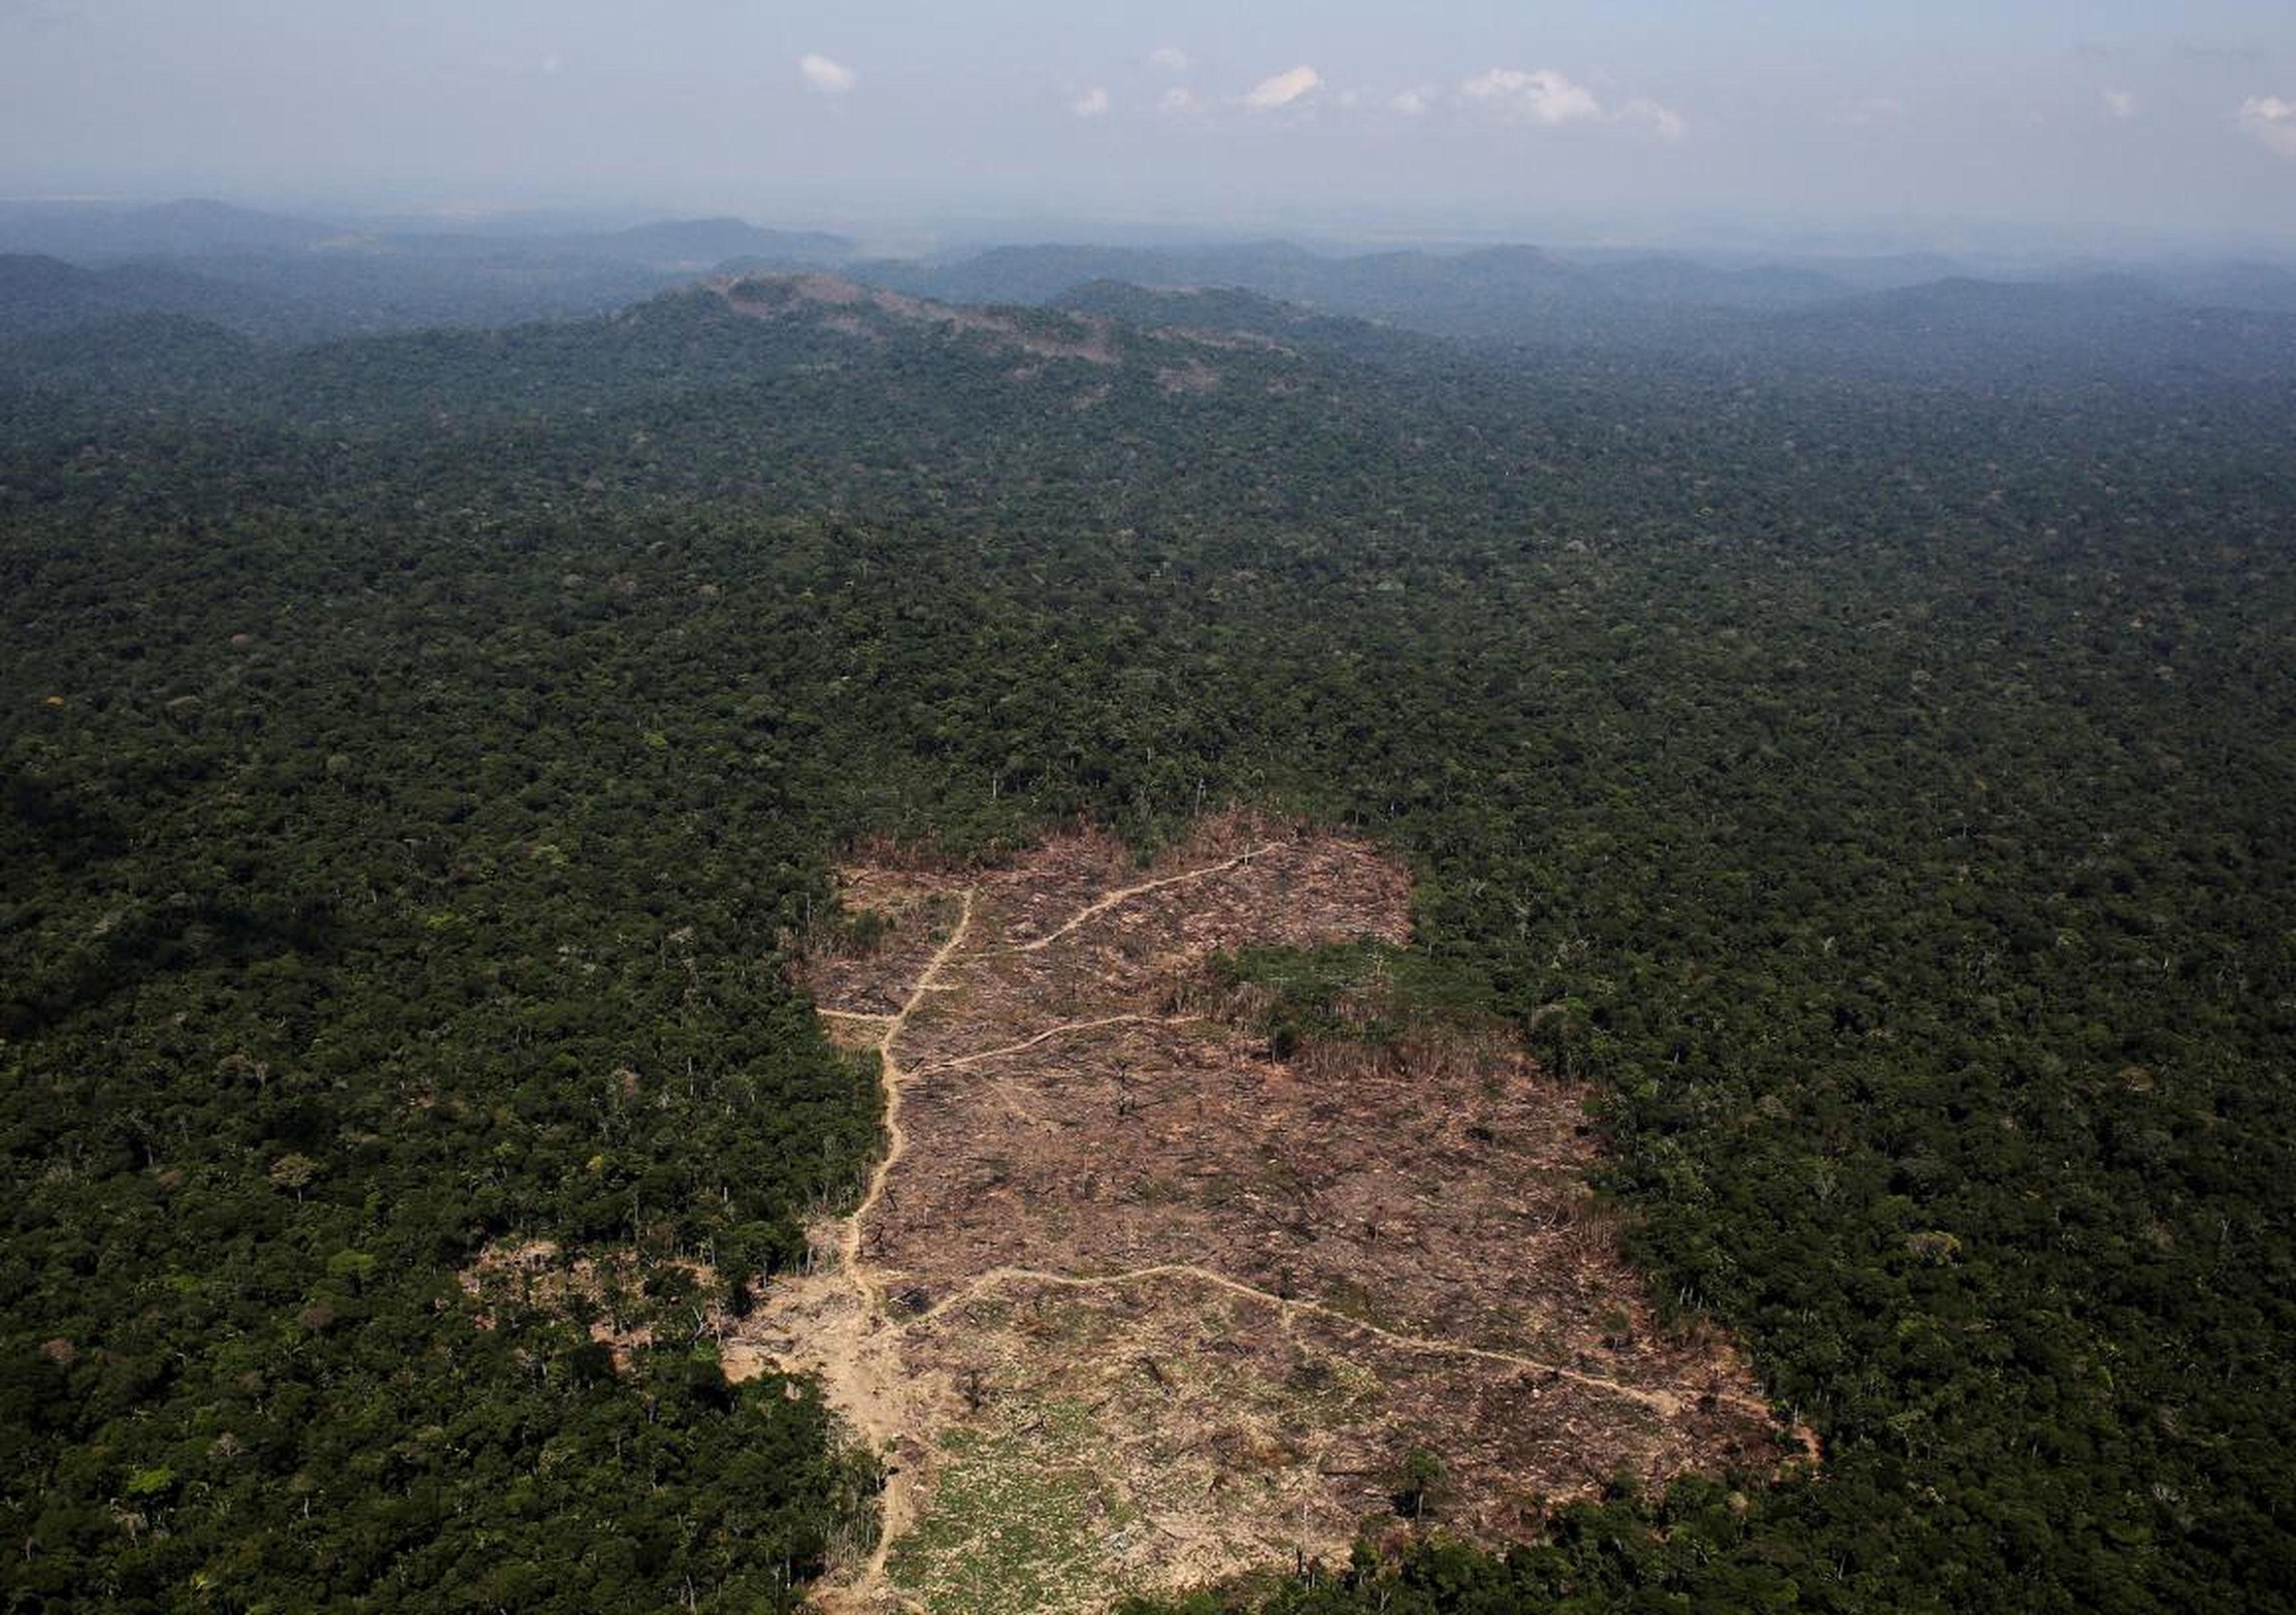 An aerial view of a tract of Amazon jungle recently cleared by loggers and farmers near the city of Novo Progresso, Brazil.